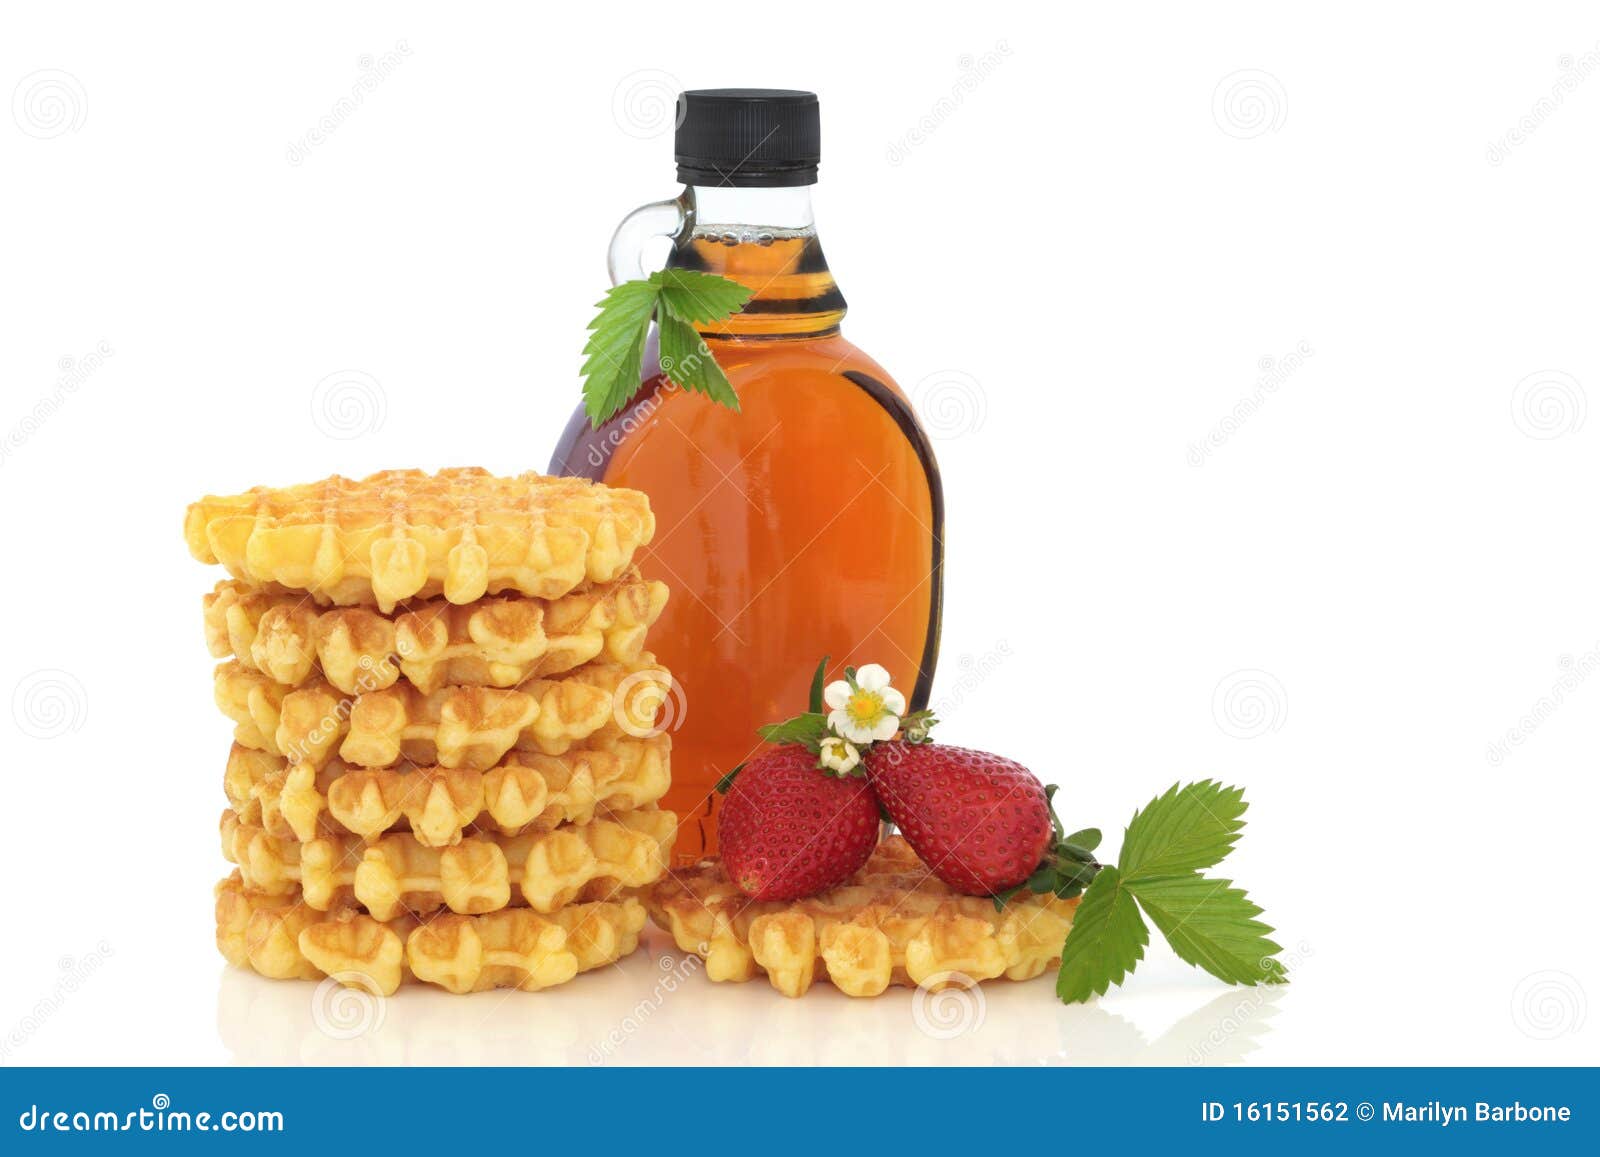 strawberry waffles and maple syrup